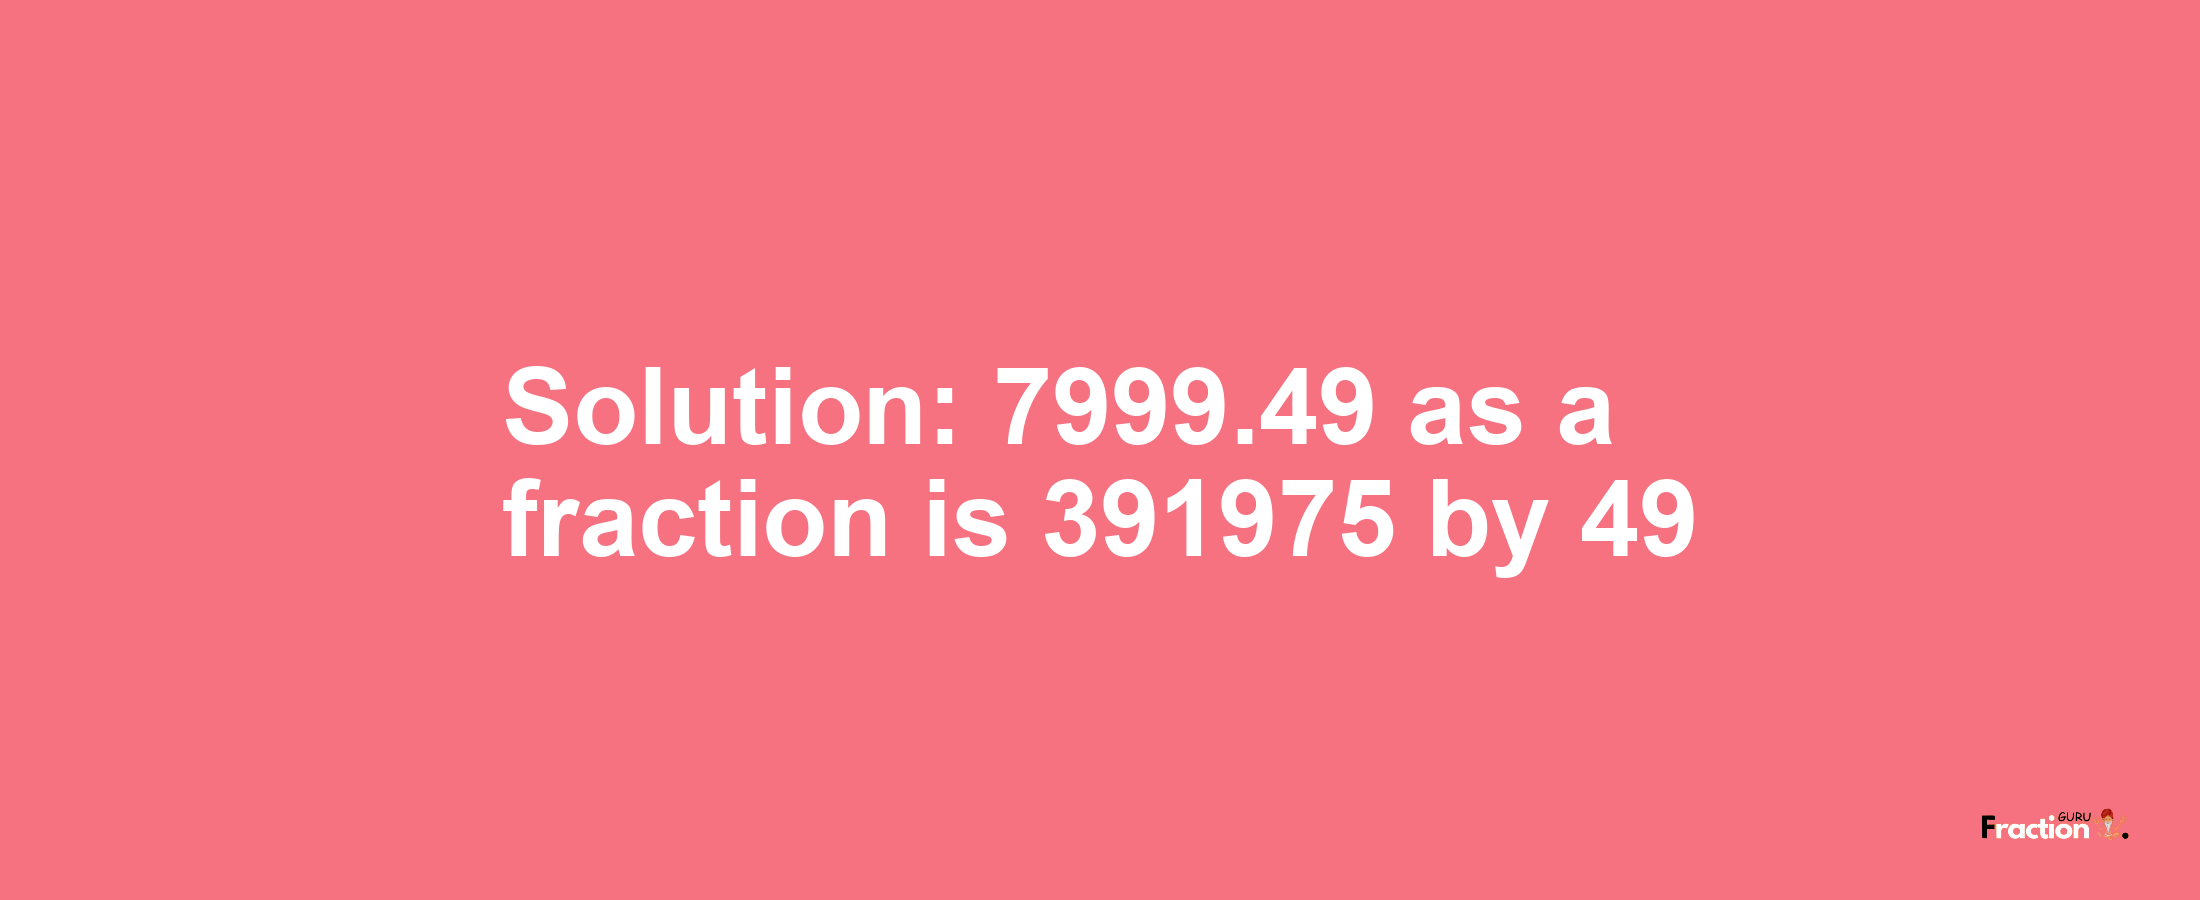 Solution:7999.49 as a fraction is 391975/49